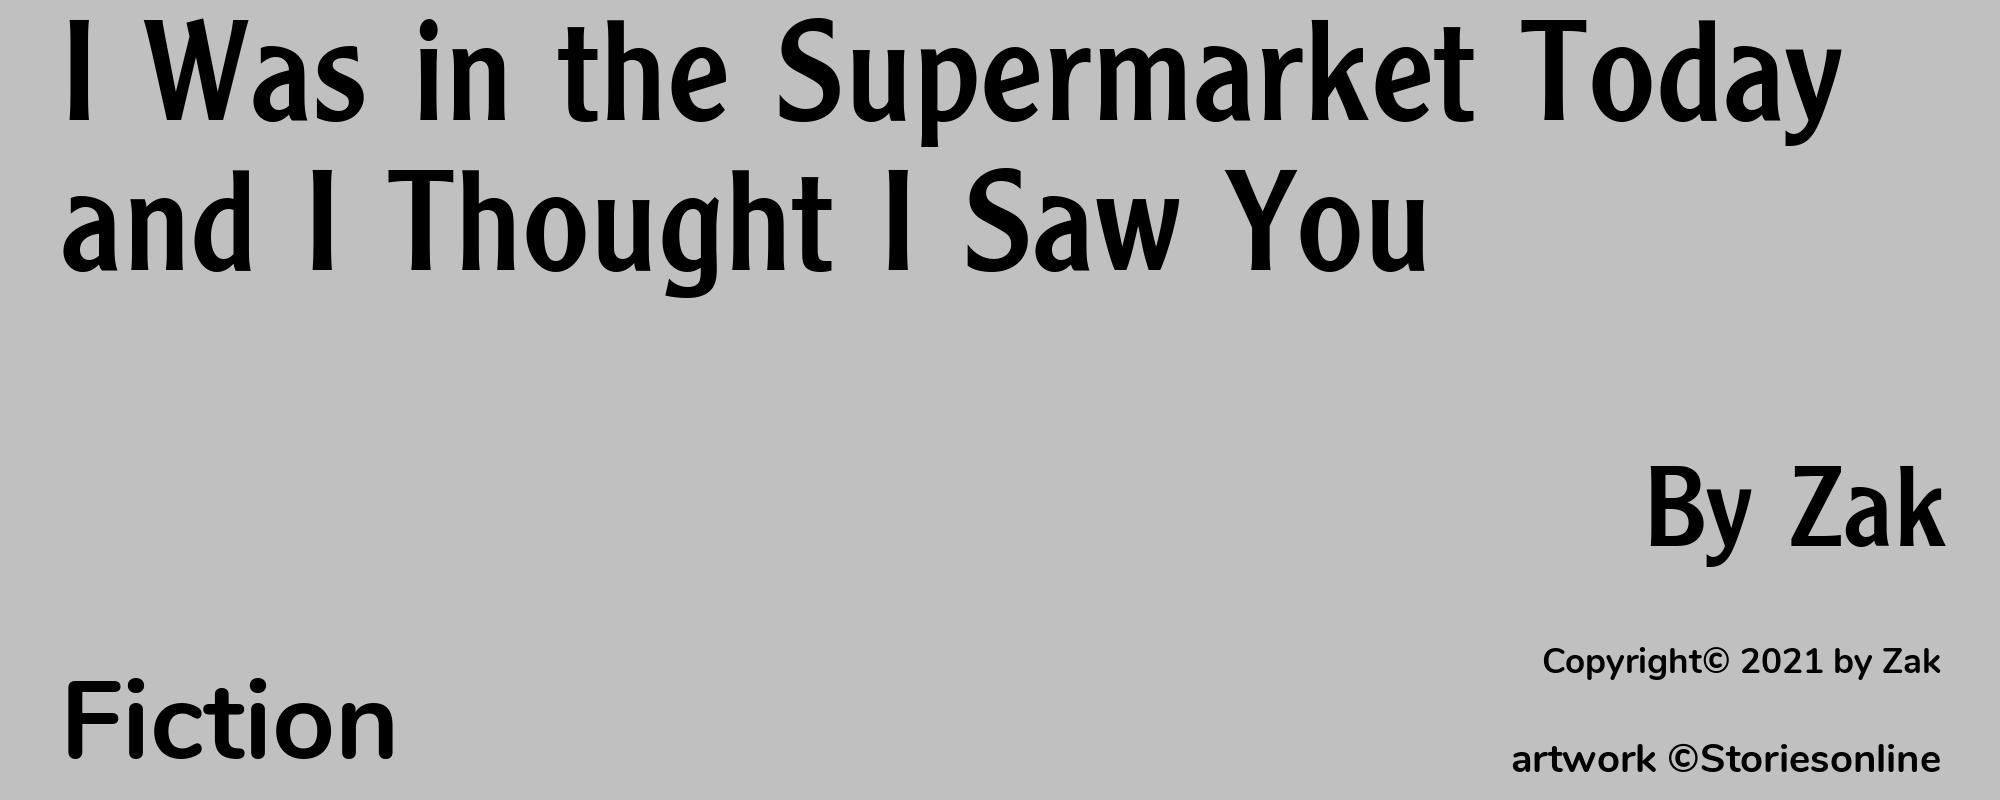 I Was in the Supermarket Today and I Thought I Saw You - Cover